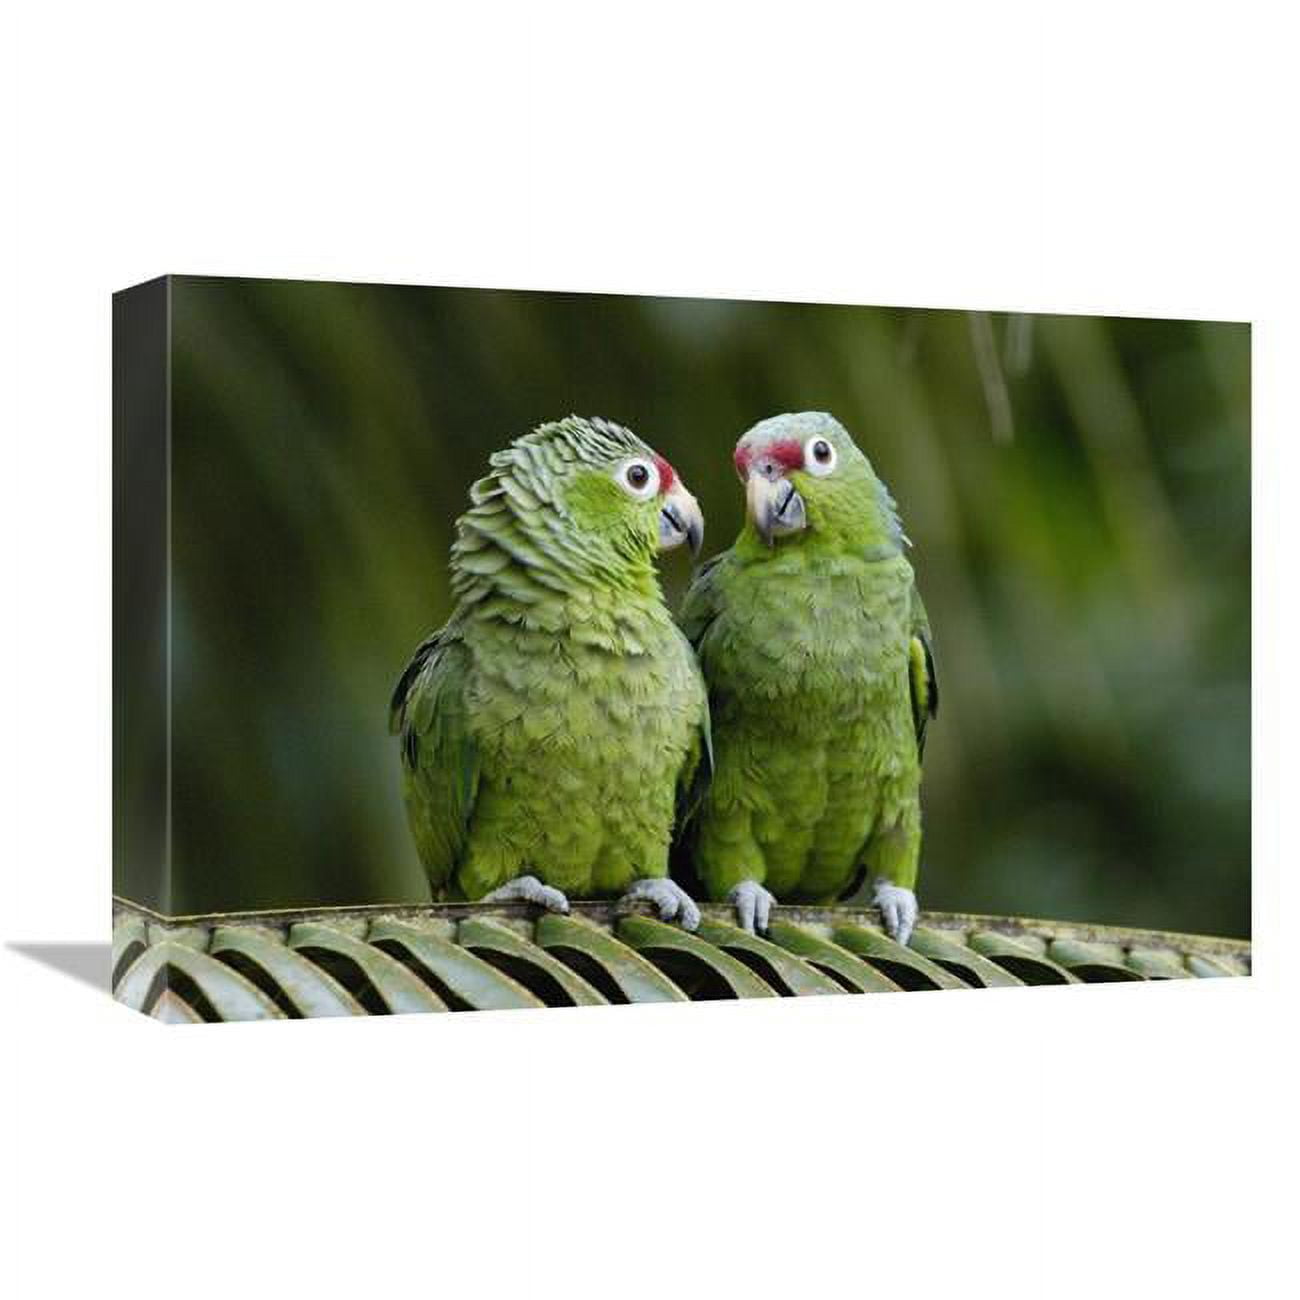 12 X 18 In. Red-lored Parrot Pair Sitting On Branch, Ecuador Art Print - Pete Oxford